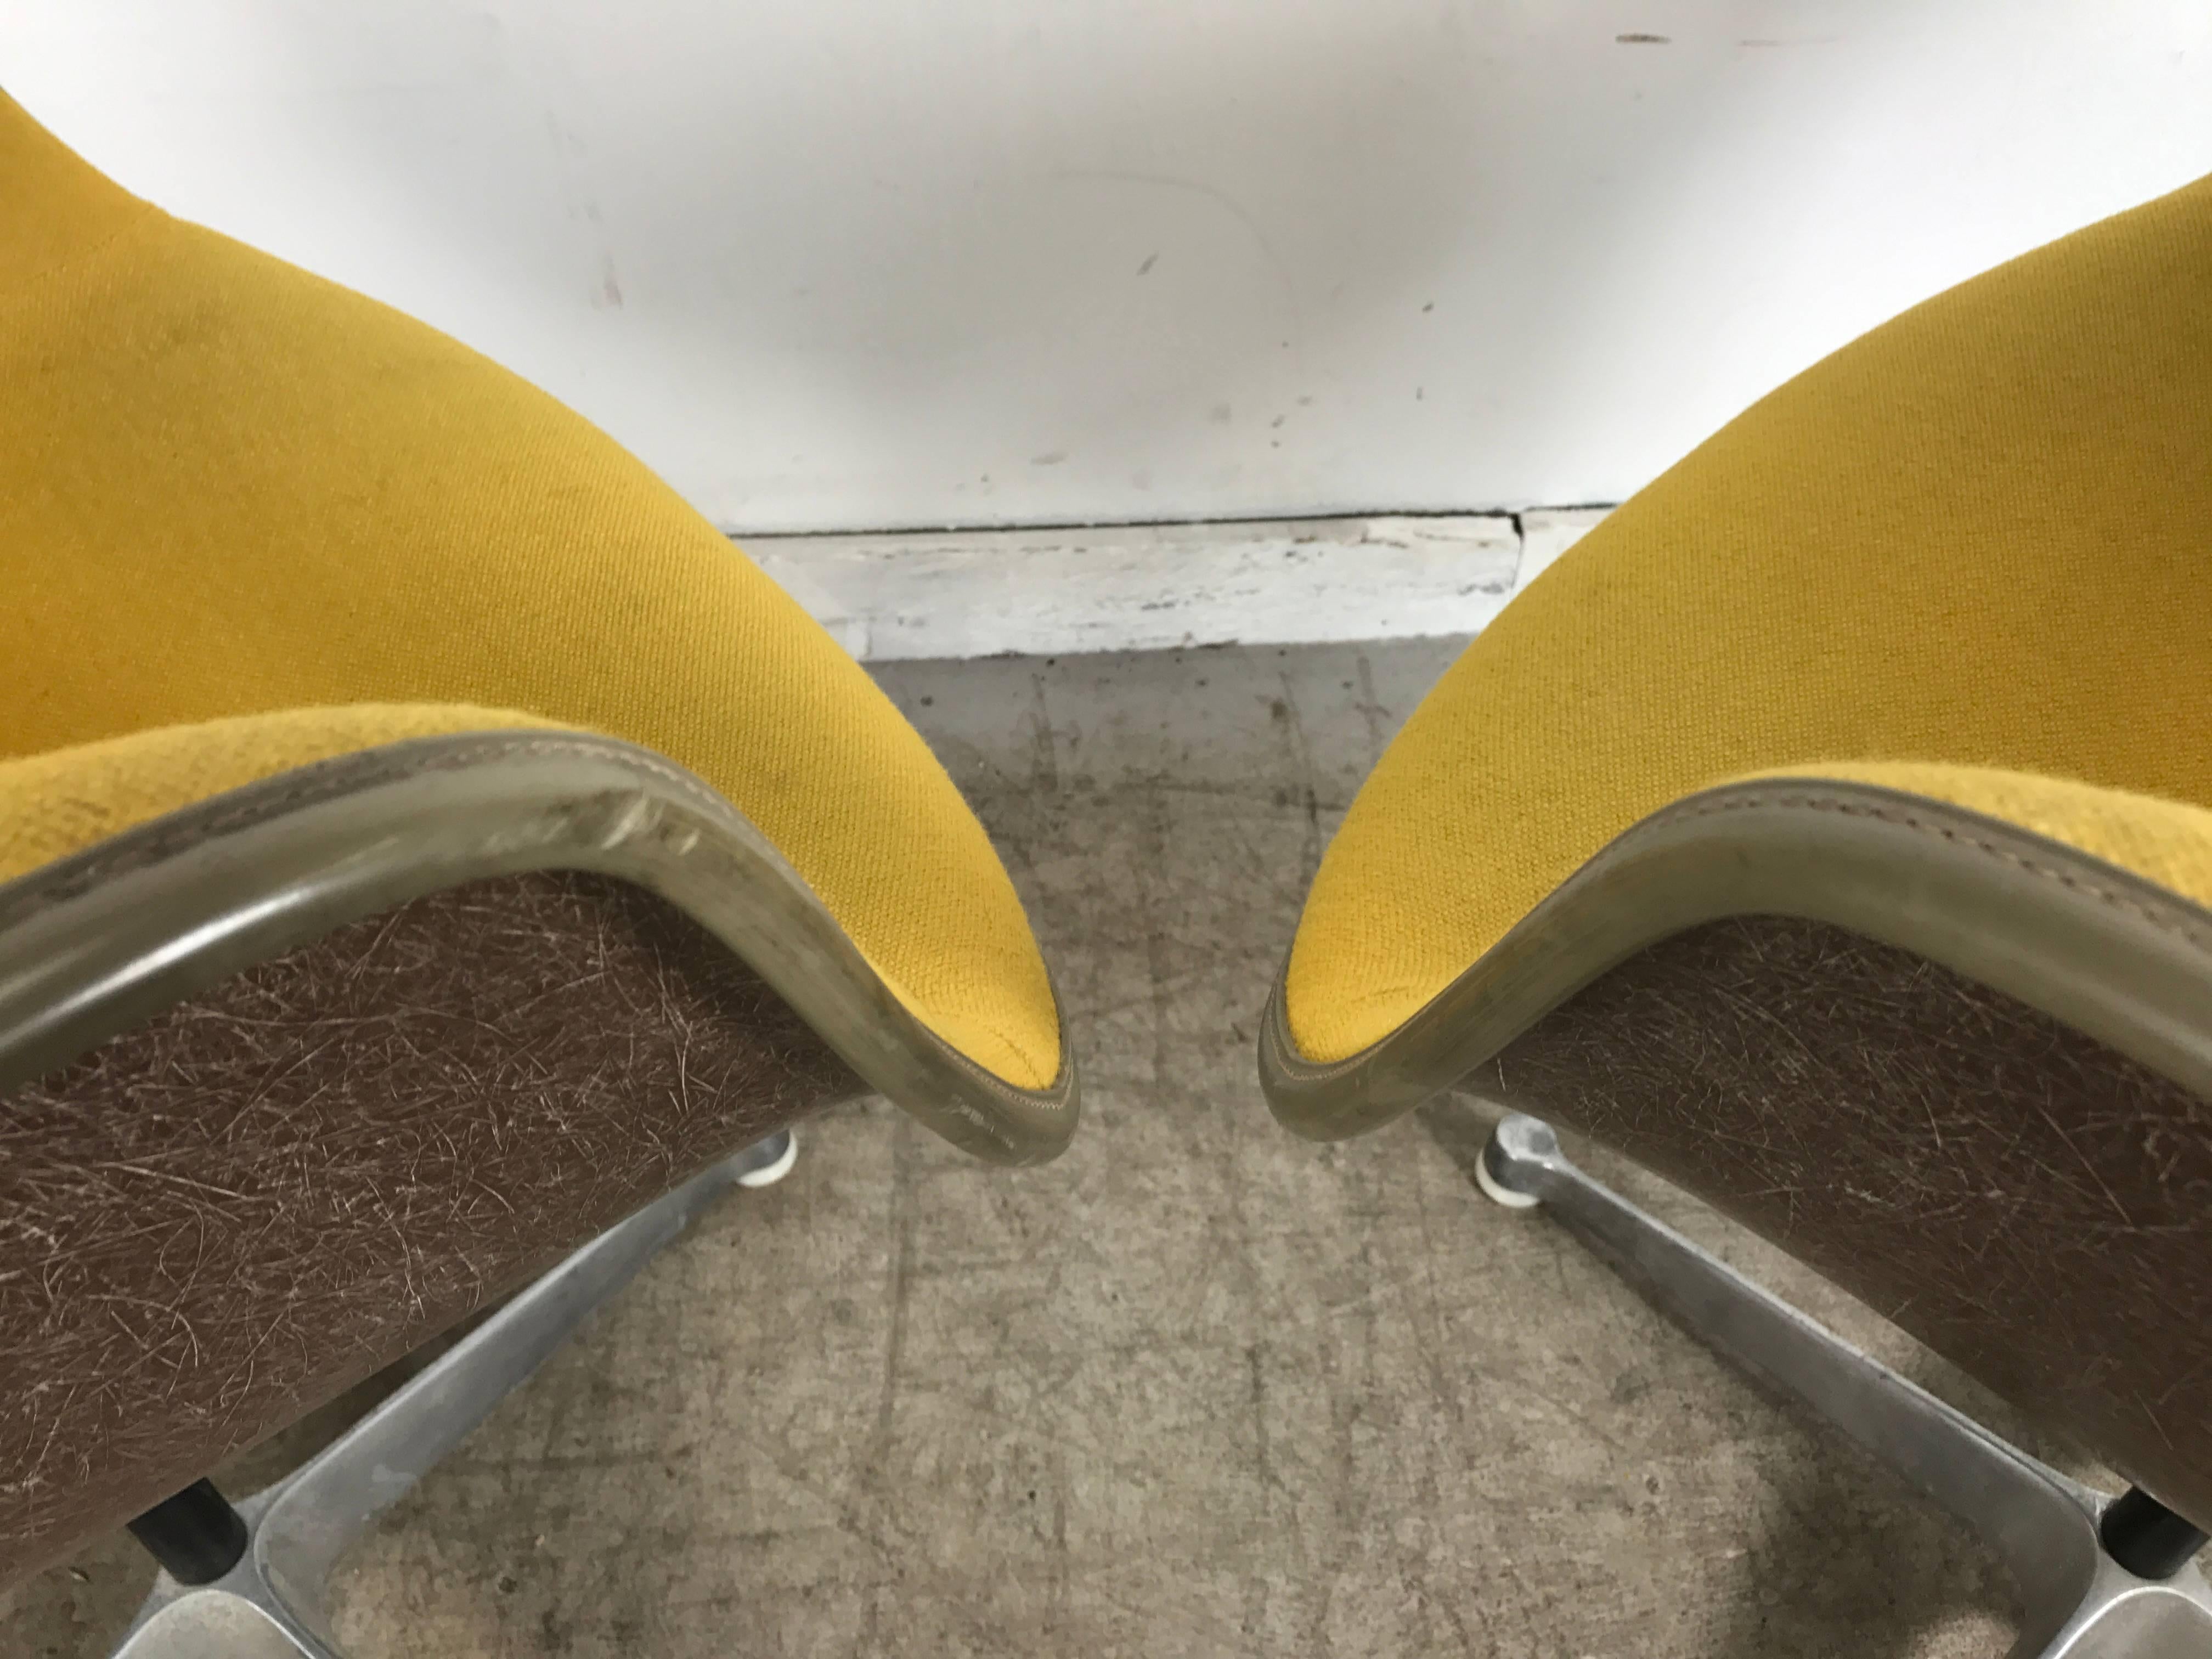 Pair of Charles and Ray Eames swivel padded arm shell chairs, unusual color combination, early brown exposed fiberglass shells. Mustard yellow fabric covers, gray piping, early four star aluminium base, retains original Herman Miller label.